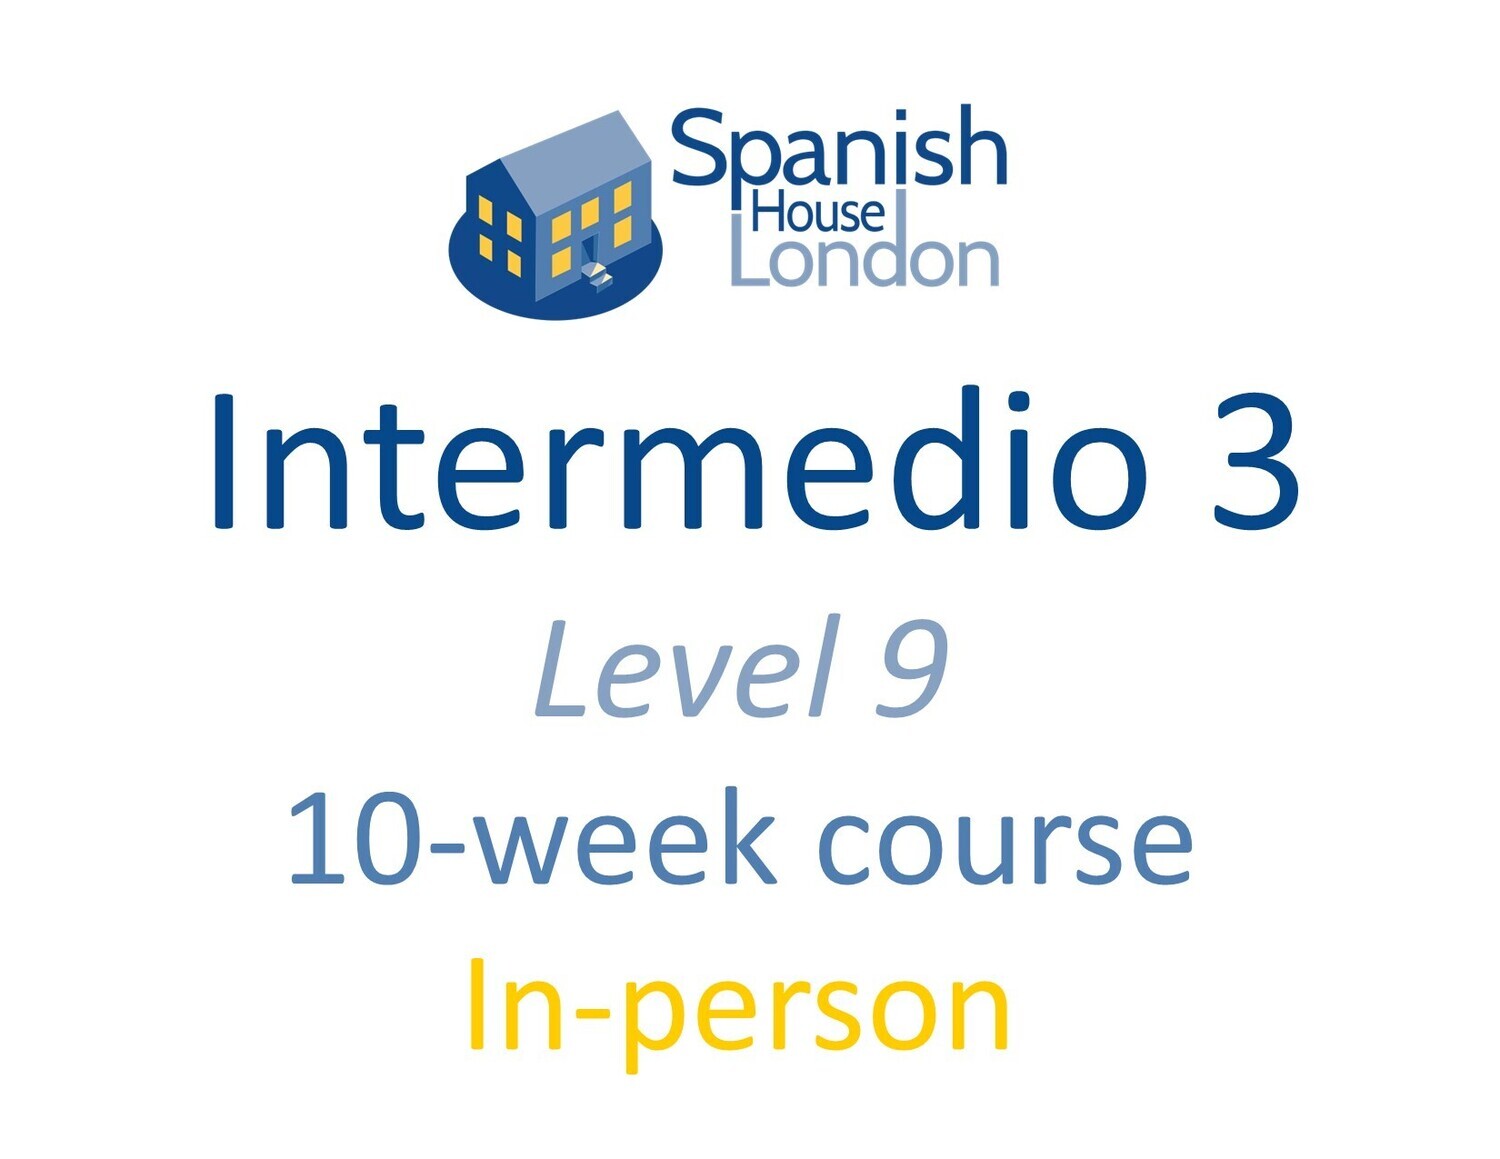 Intermedio 3 Course starting on 20th June at 6pm in Clapham North